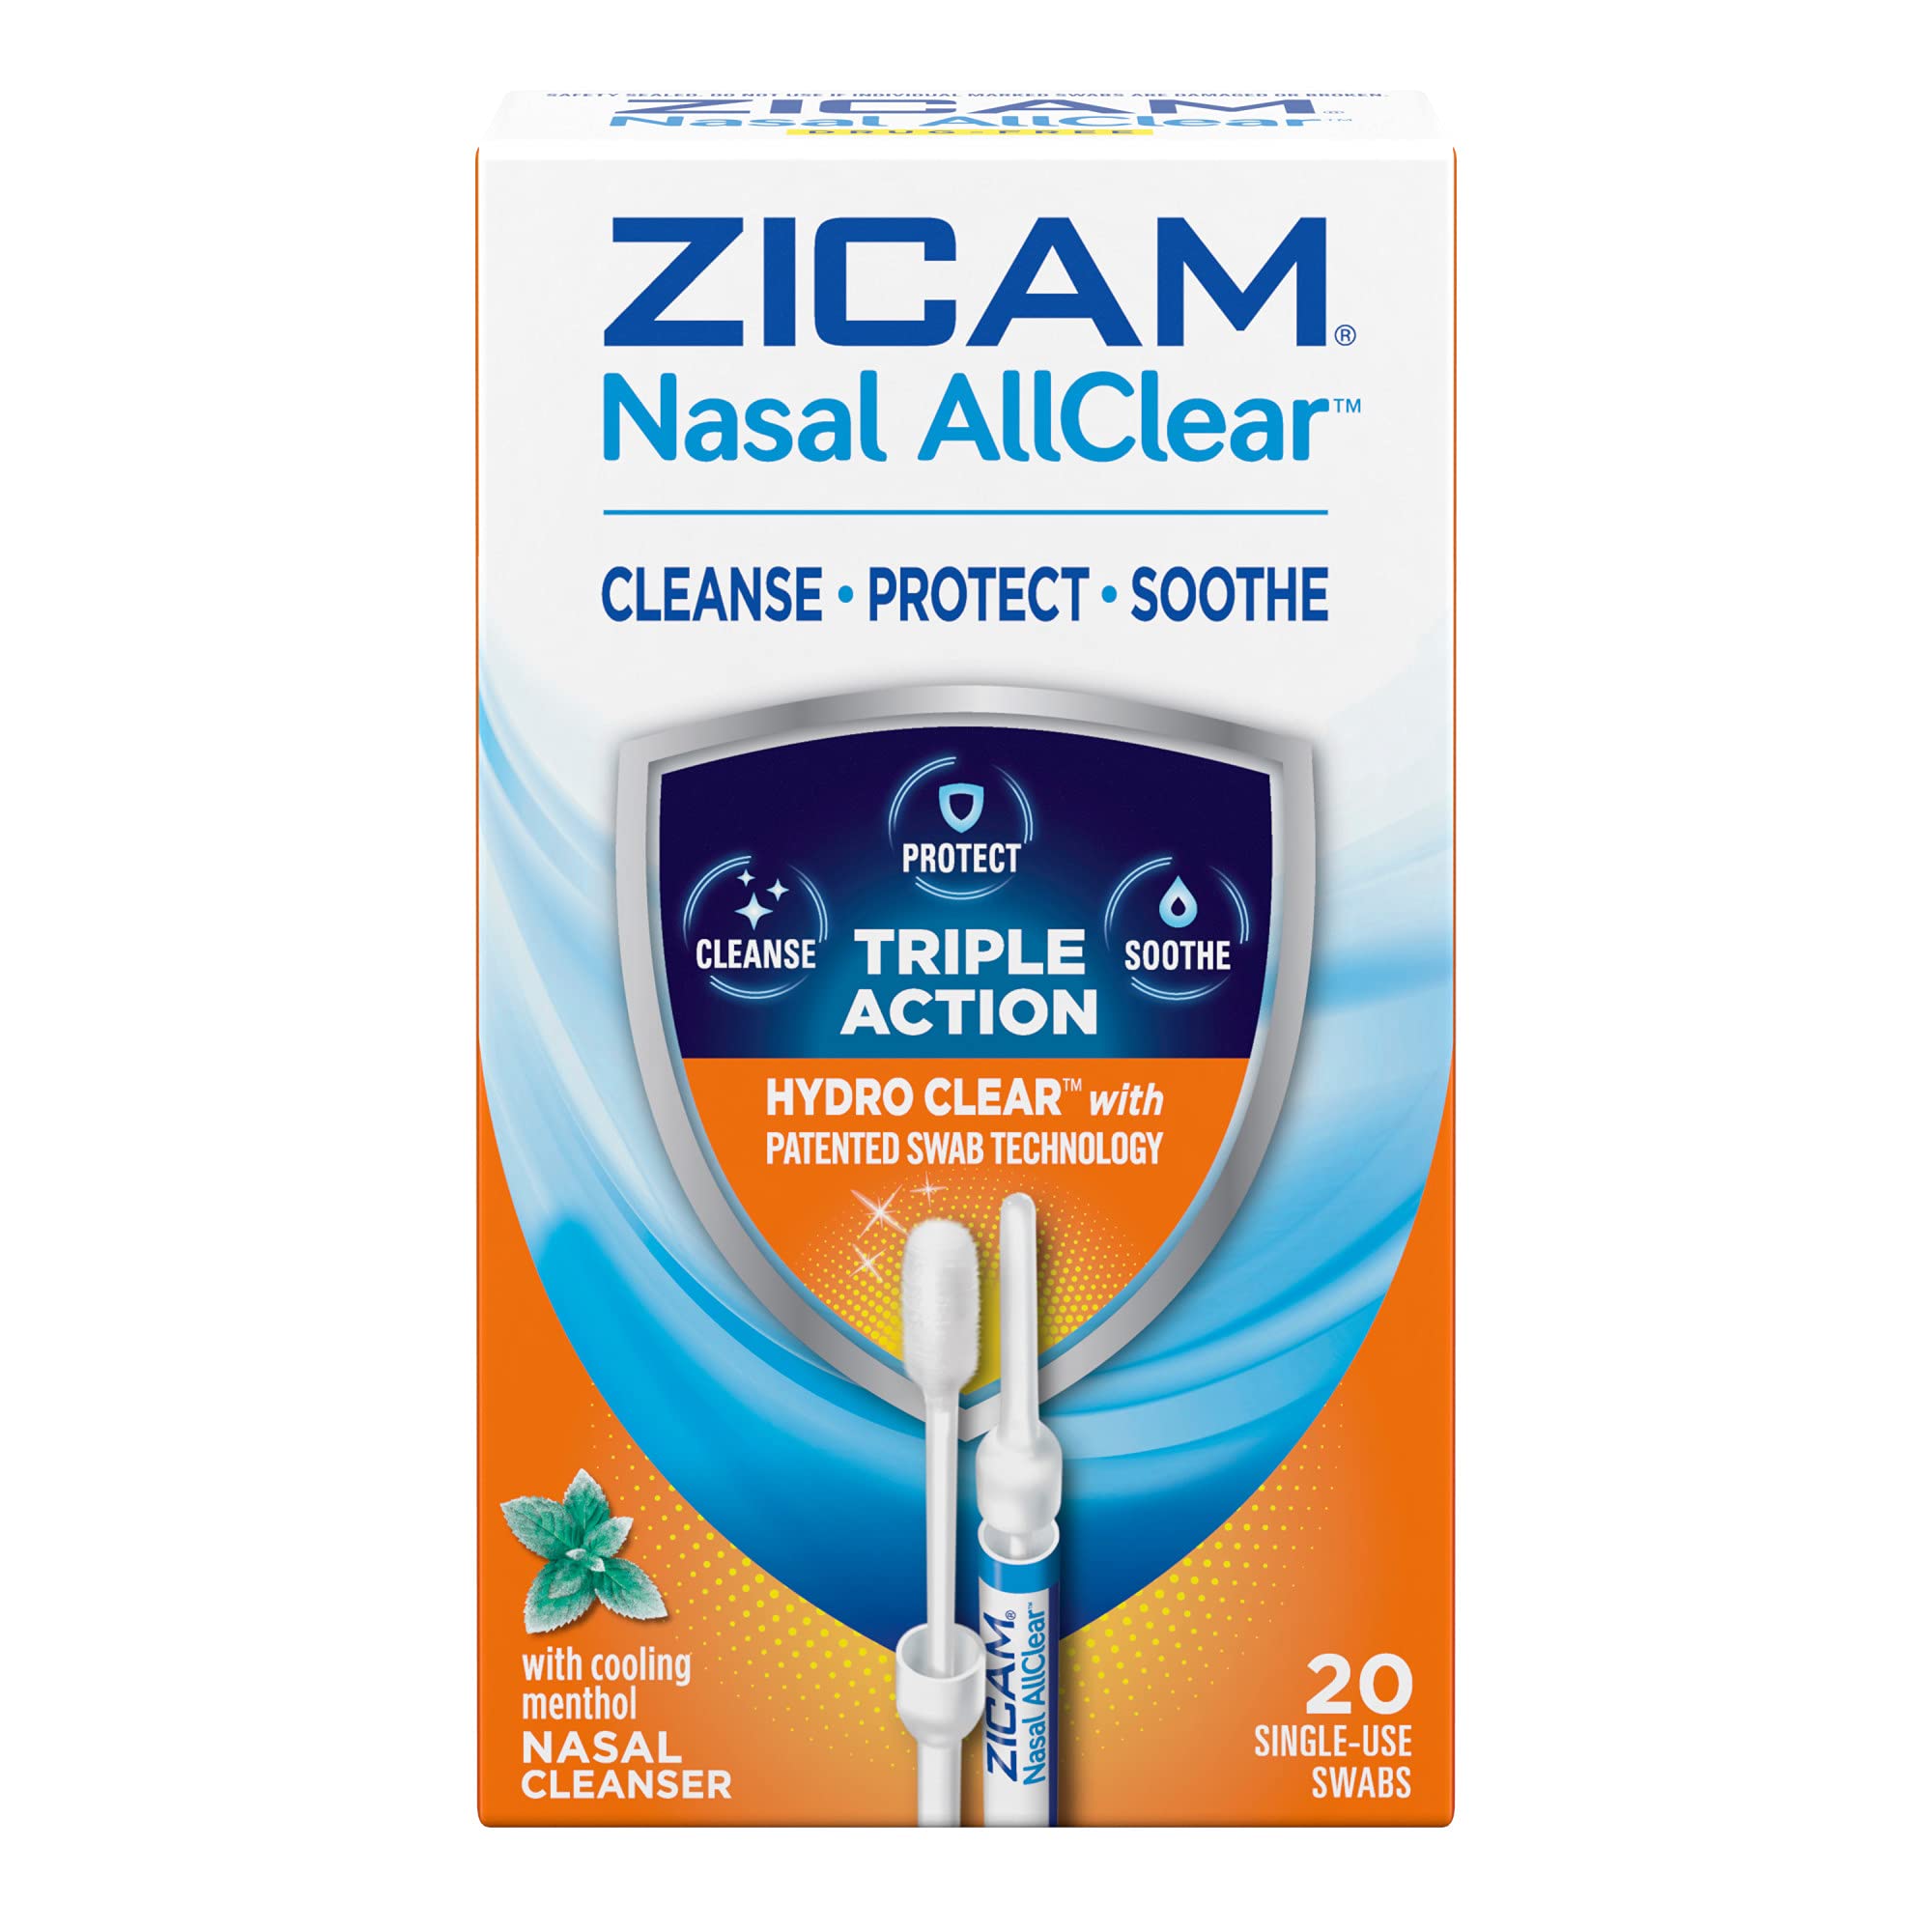 20-Count Zicam Nasal AllClear Triple Action Allergy & Sinus Relief Nasal Cleanser w/ Cooling Menthol $5.68 ($0.28 each) w/ S&S + Free Shipping w/ Prime or on $25+